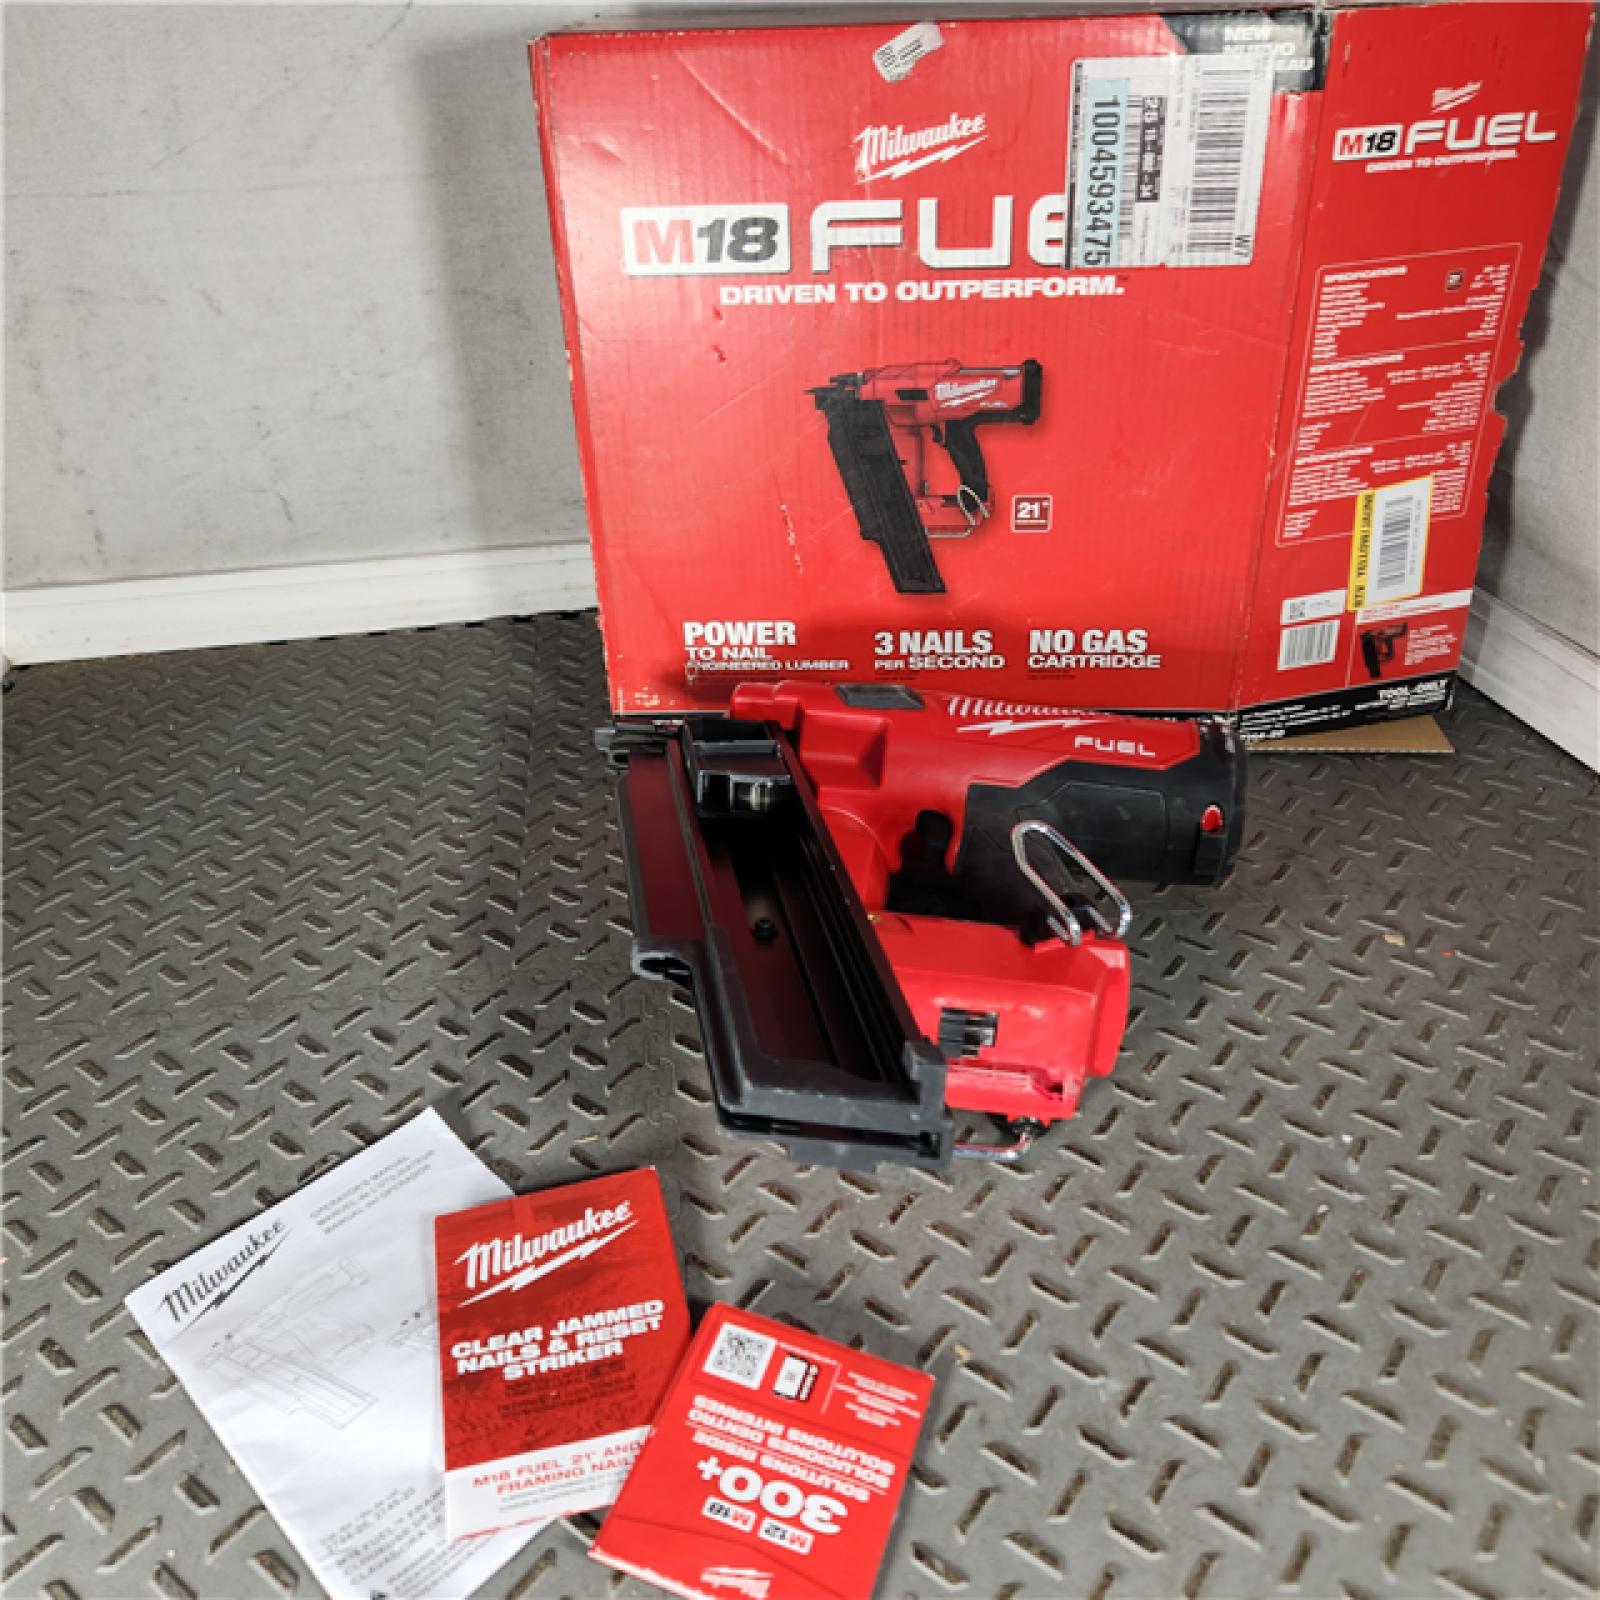 Houston Location - AS-IS Milwaukee 2744-20 21-Degree 3-1/2 Plastic Collated M18 FUEL Cordless Framing Nailer (Tool Only) - Appears IN LIKE NEW Condition